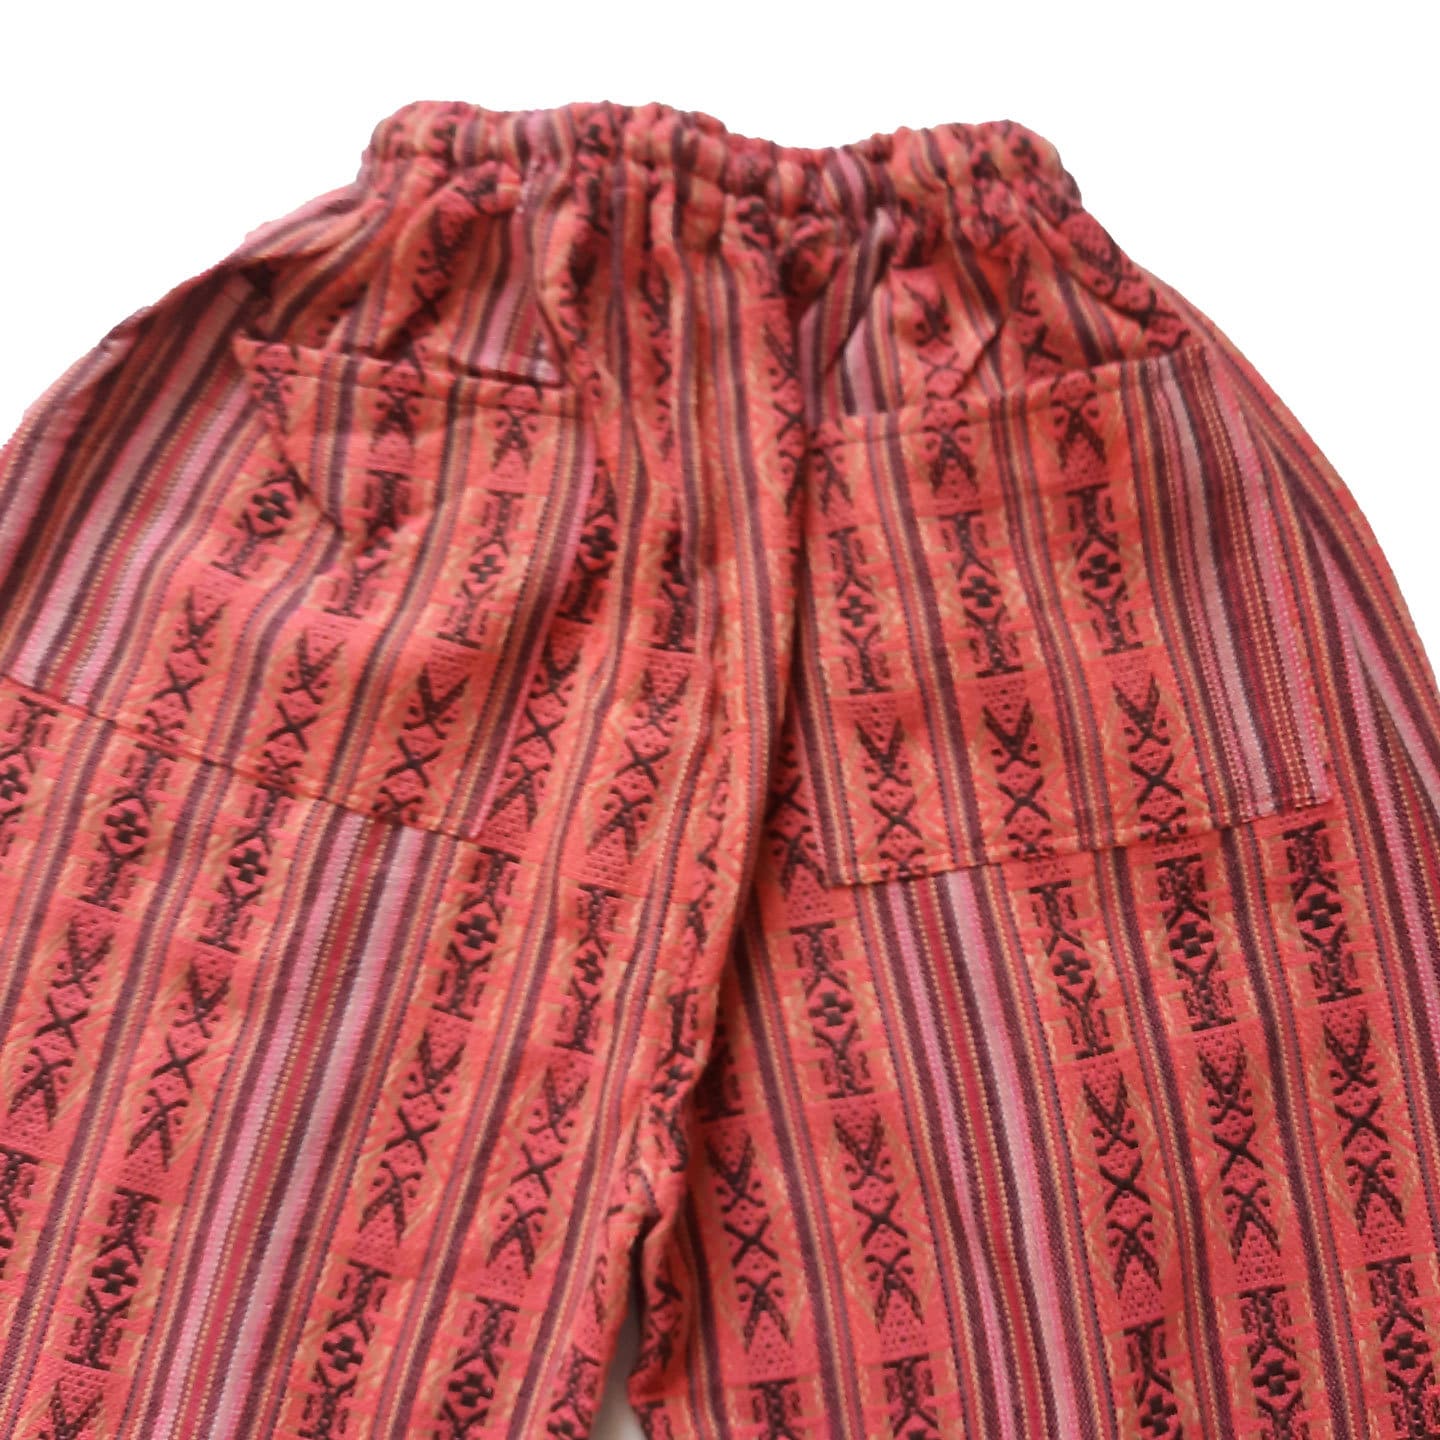 Pants Size XL | Hippie Pants | Loungewear Womens Pants | Comfy Clothes | Mens Pants with 4 Pockets | Peach Brown | Father's Day Gift